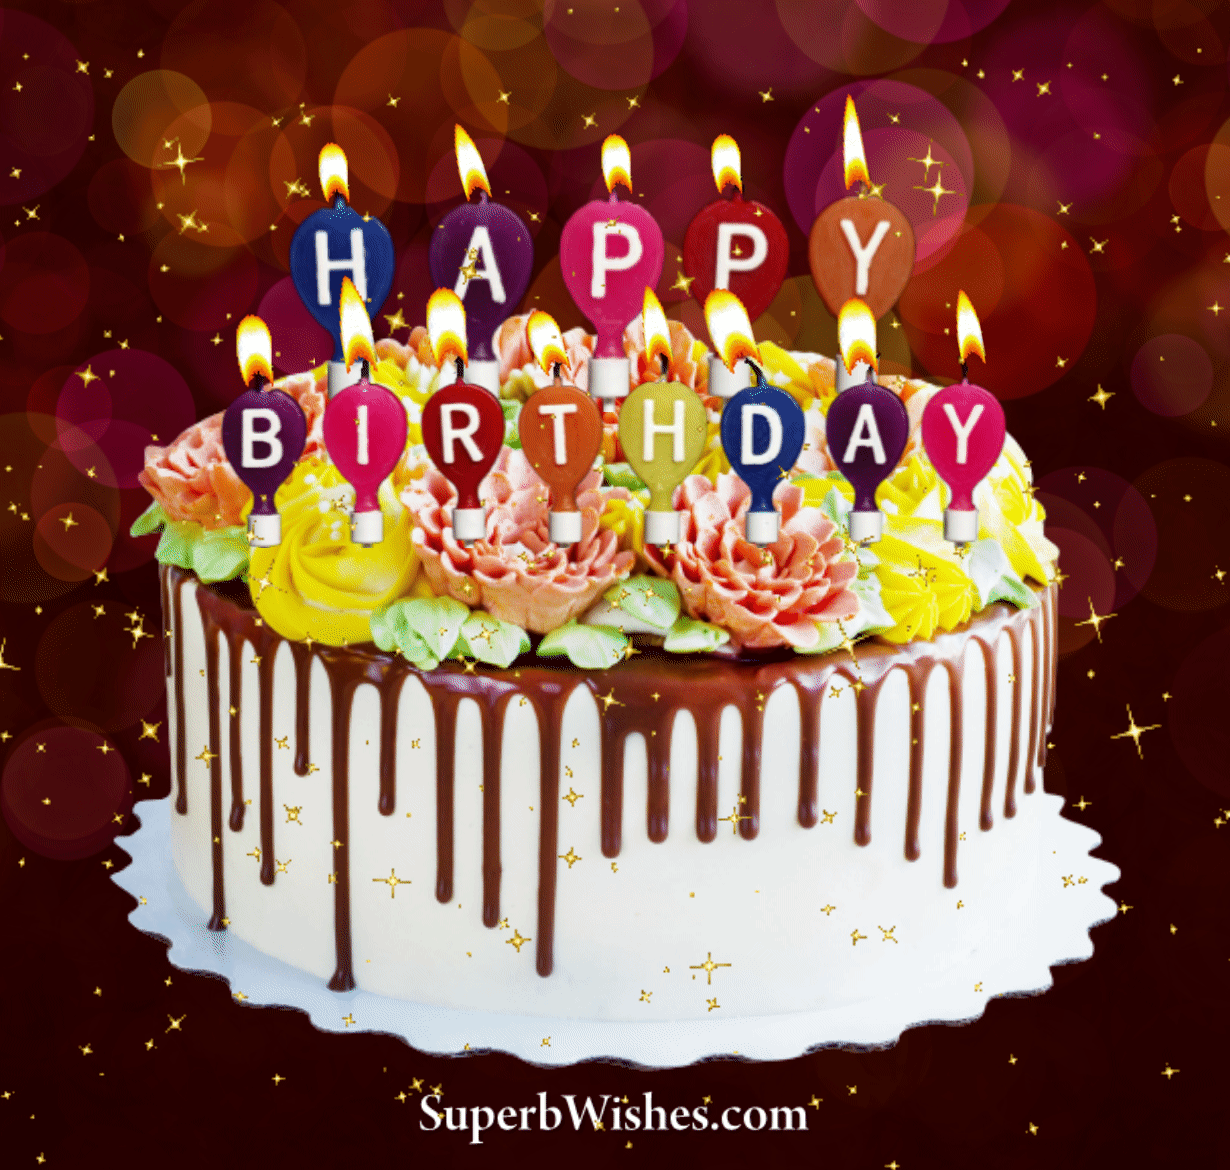 Happy Birthday To You Cake Gif Pictures, Photos, and Images for Facebook,  Tumblr, Pinterest, and Twitter